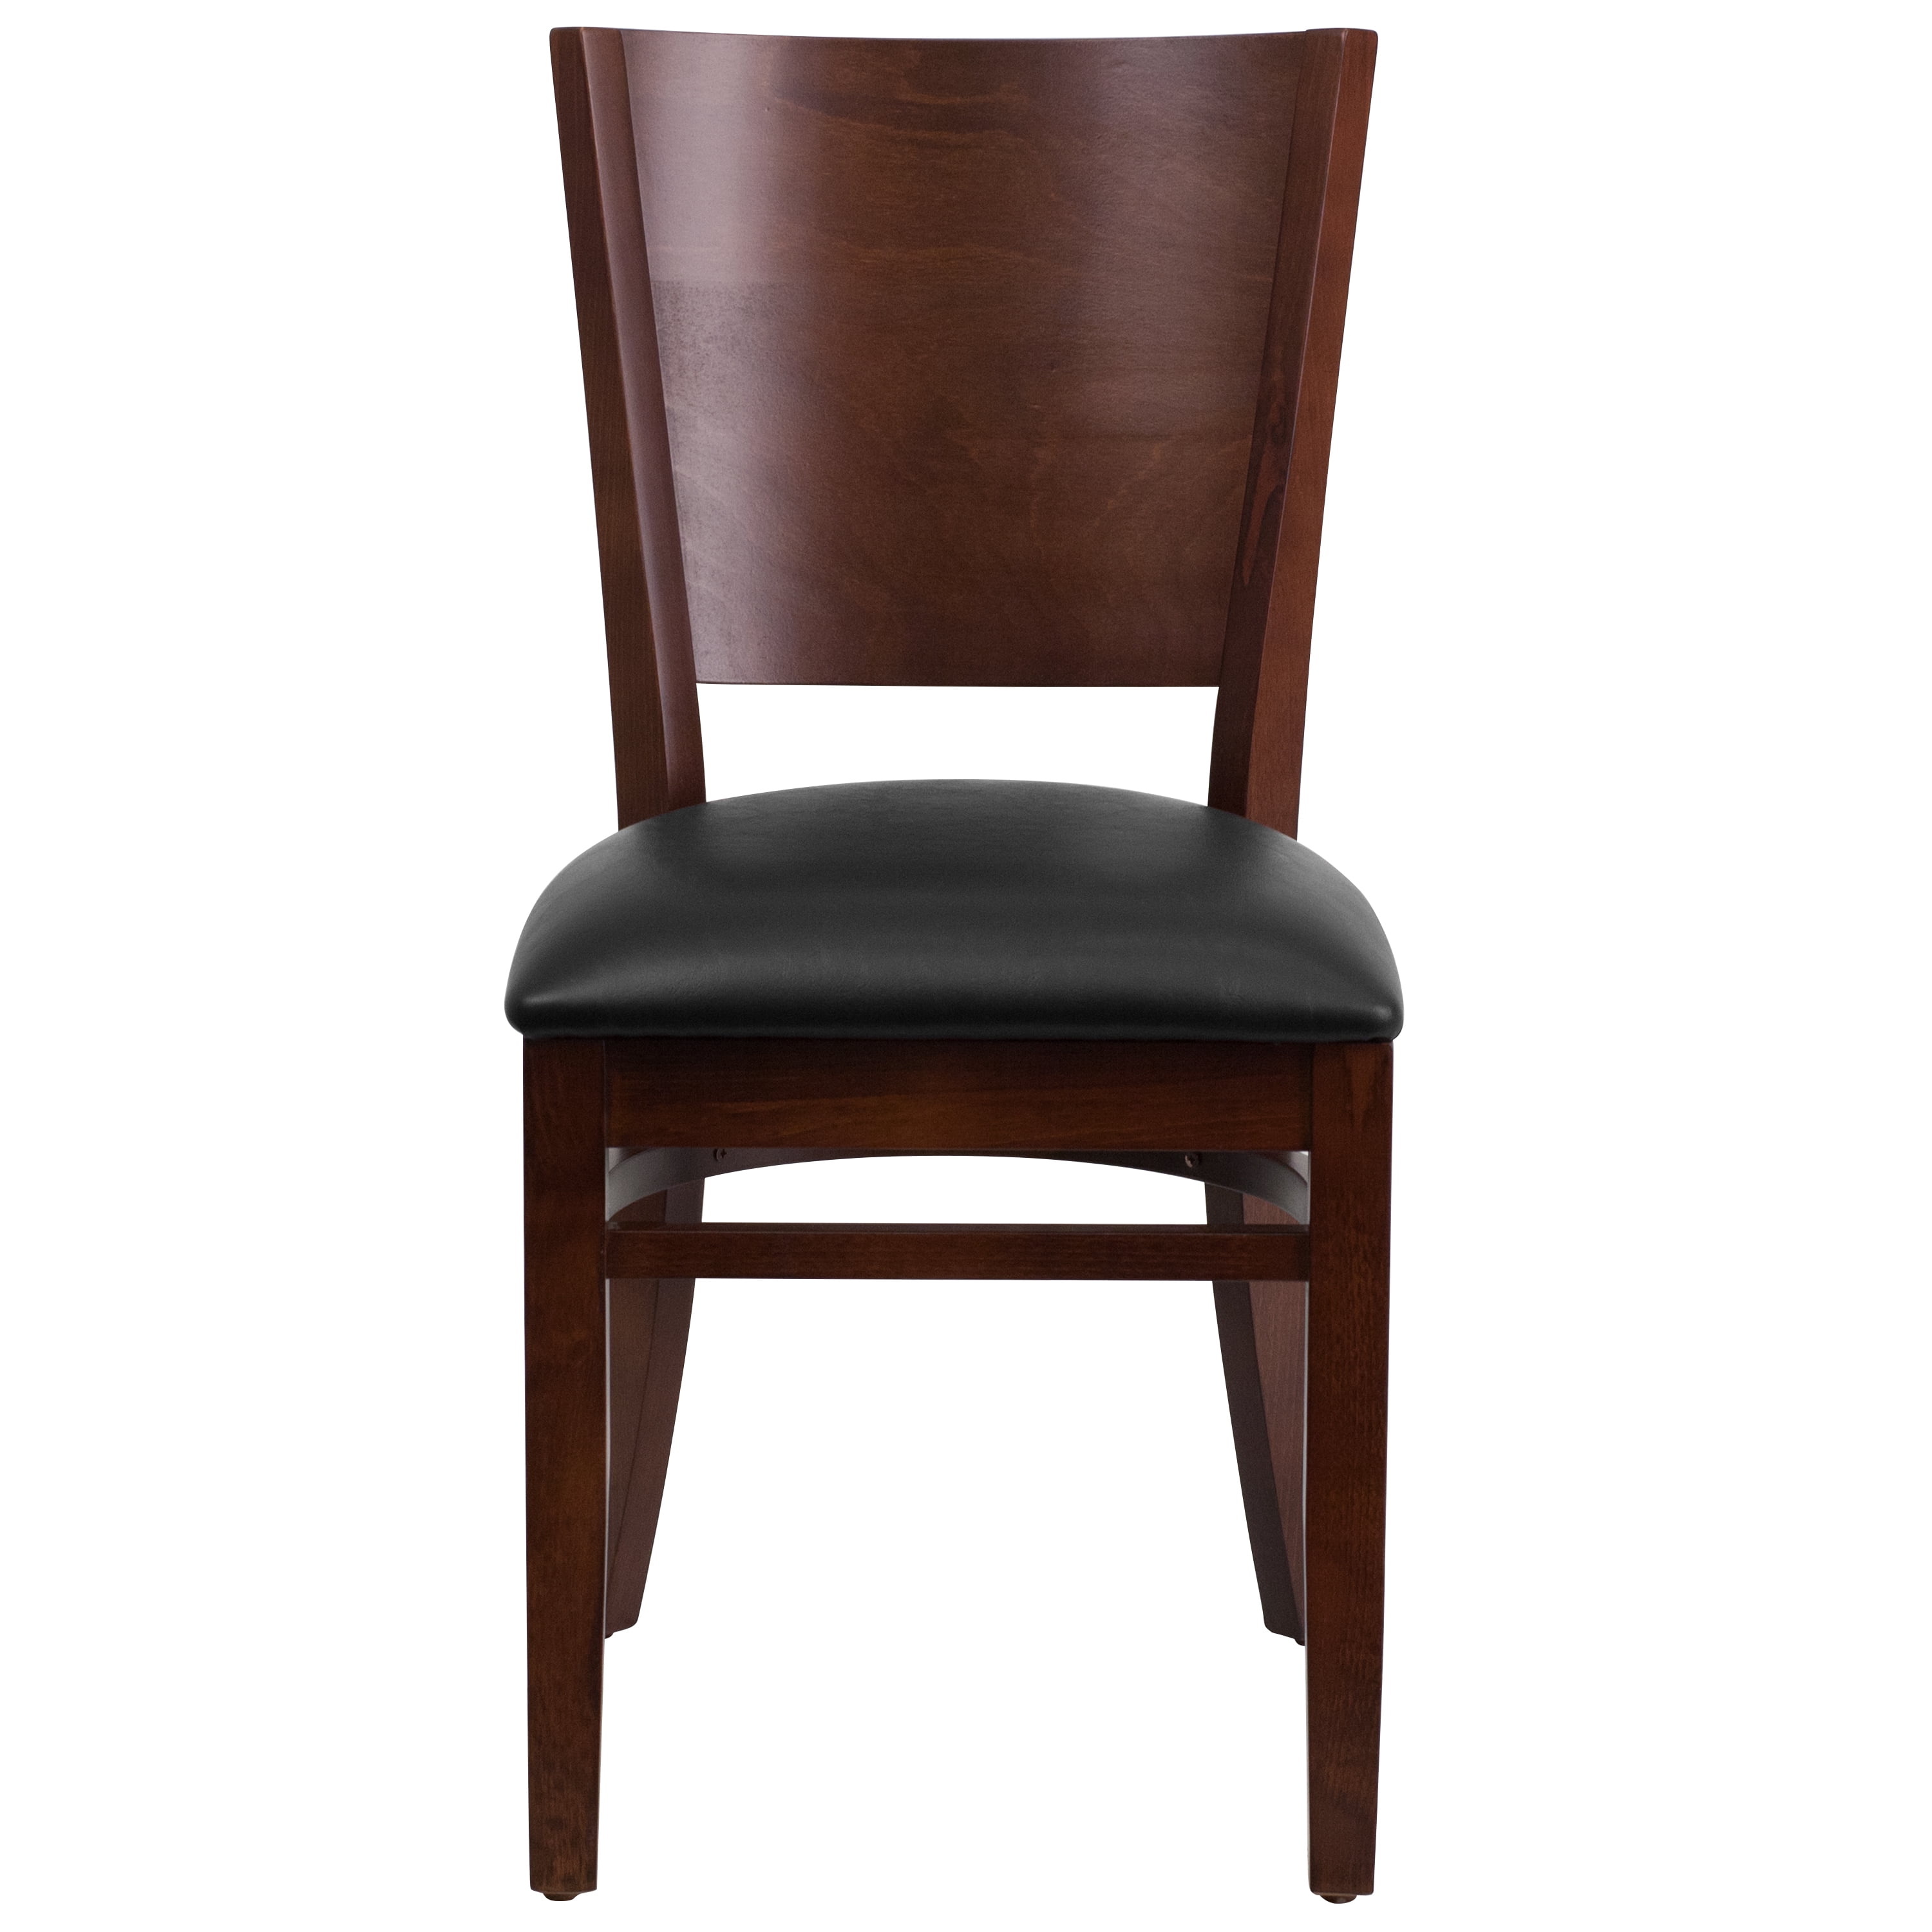 Solid Back Walnut Wood Finish Restaurant Chair with Black Vinyl Seat 